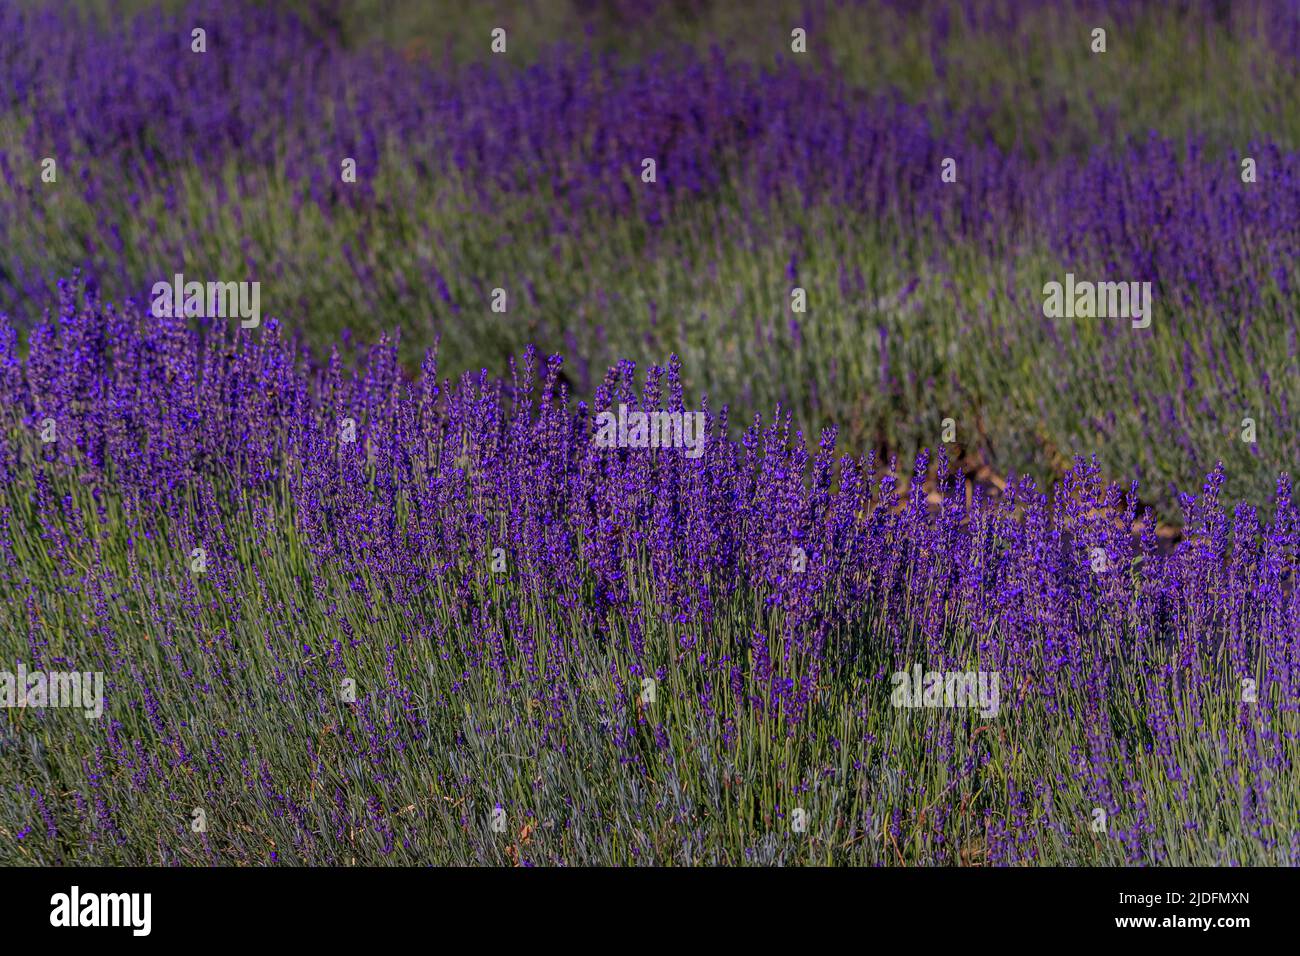 Lavender field in bloom ready for harvest on a farm in Vacaville Northern California, near San Francisco Stock Photo